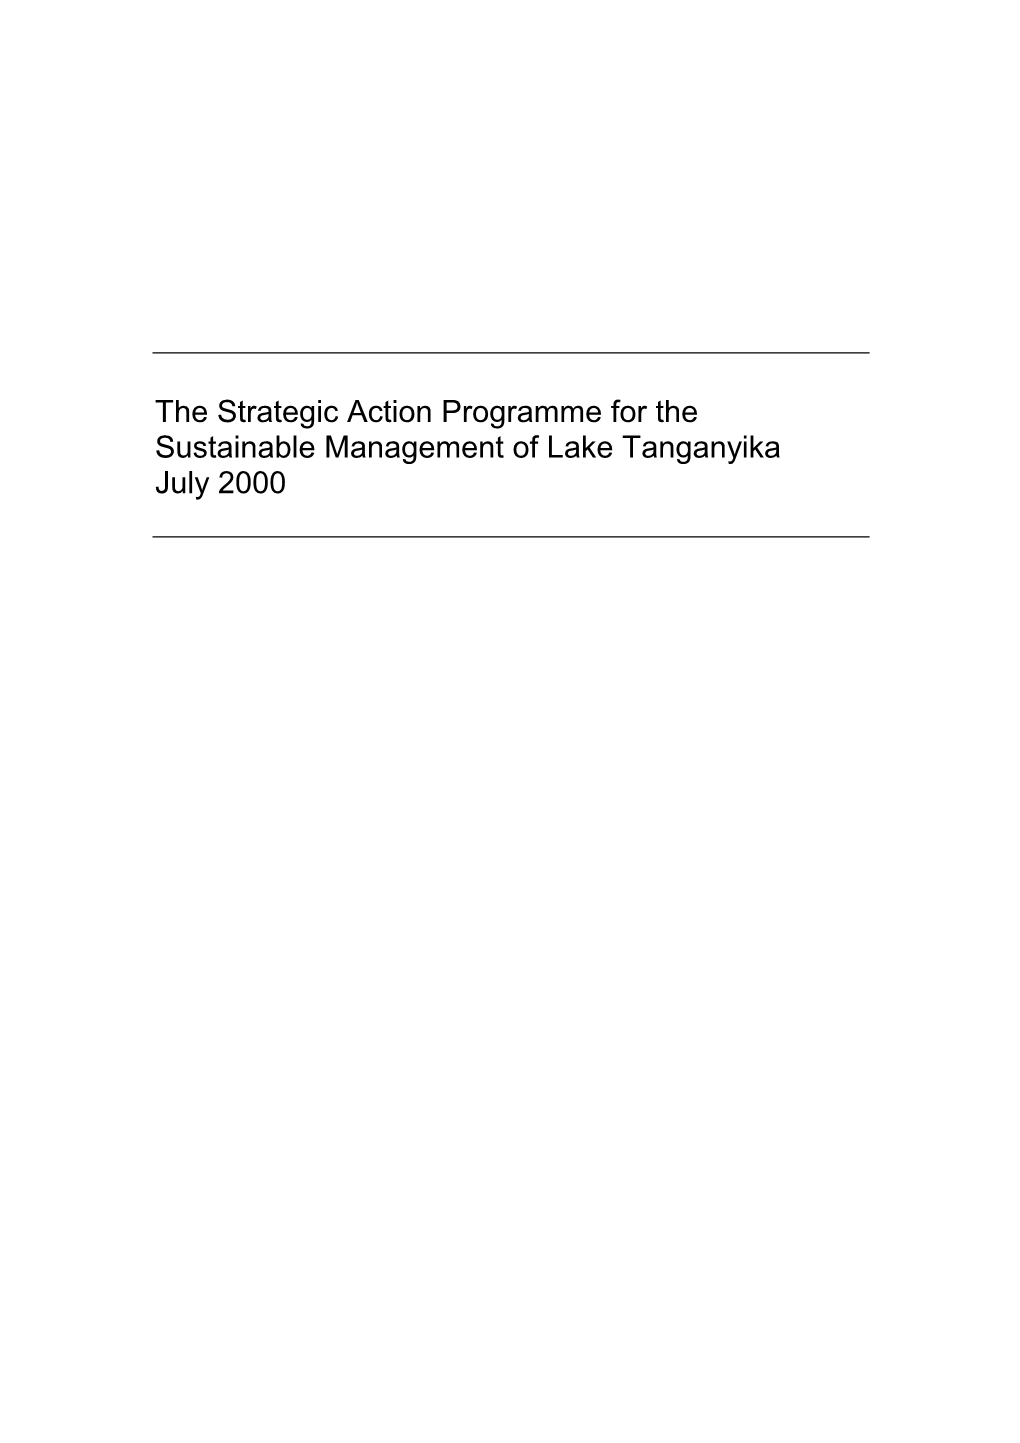 The Strategic Action Programme for the Sustainable Management Of